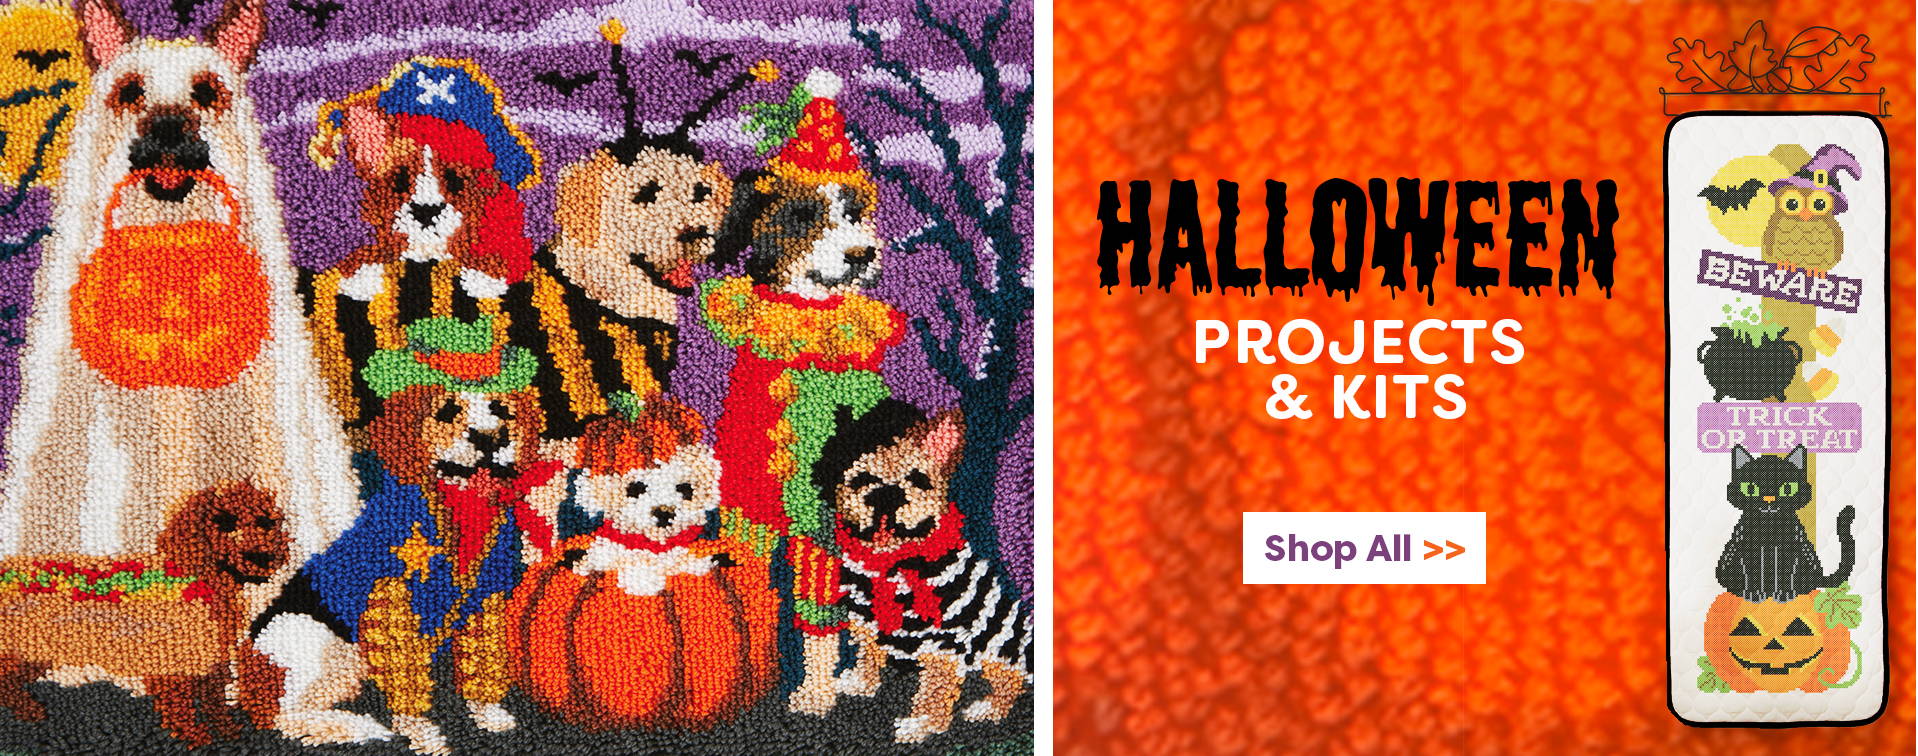 Halloween Projects and Kits Shop Now